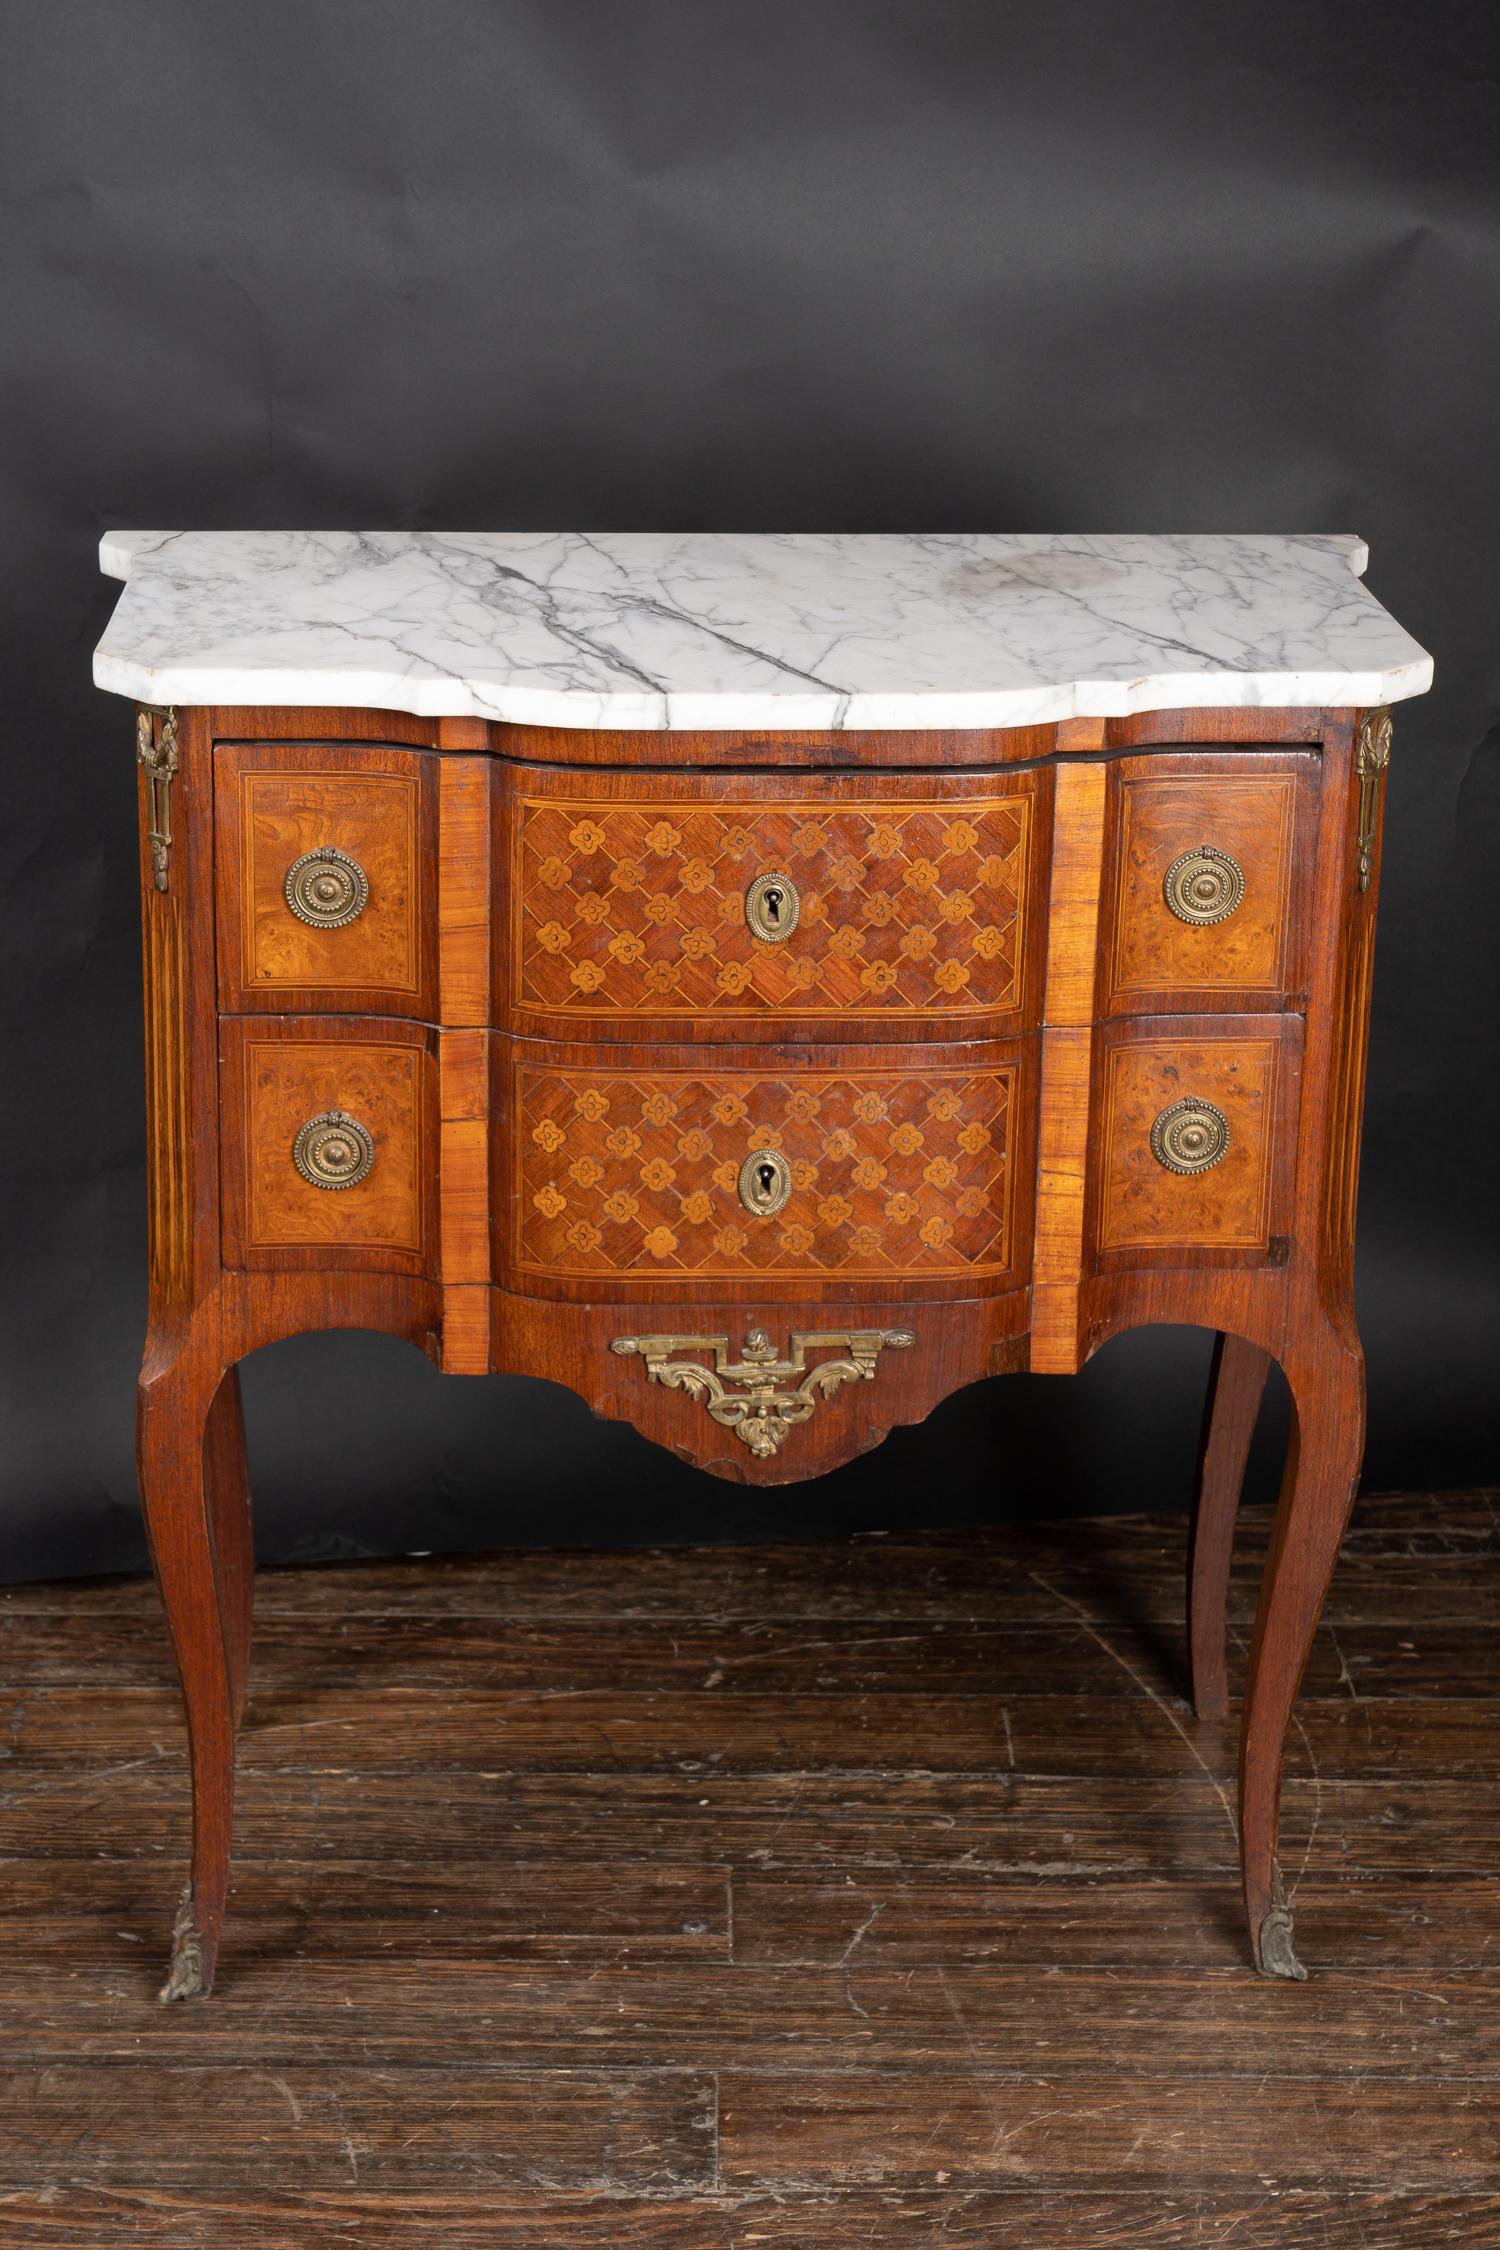 This classic French transition marble top chest with drawers features satinwood, kingwood, is inlaid with burl walnut, and sports detailed marquetry alongside bronze mounts and a marble top. The piece features a body classic to the Louis XVI style,